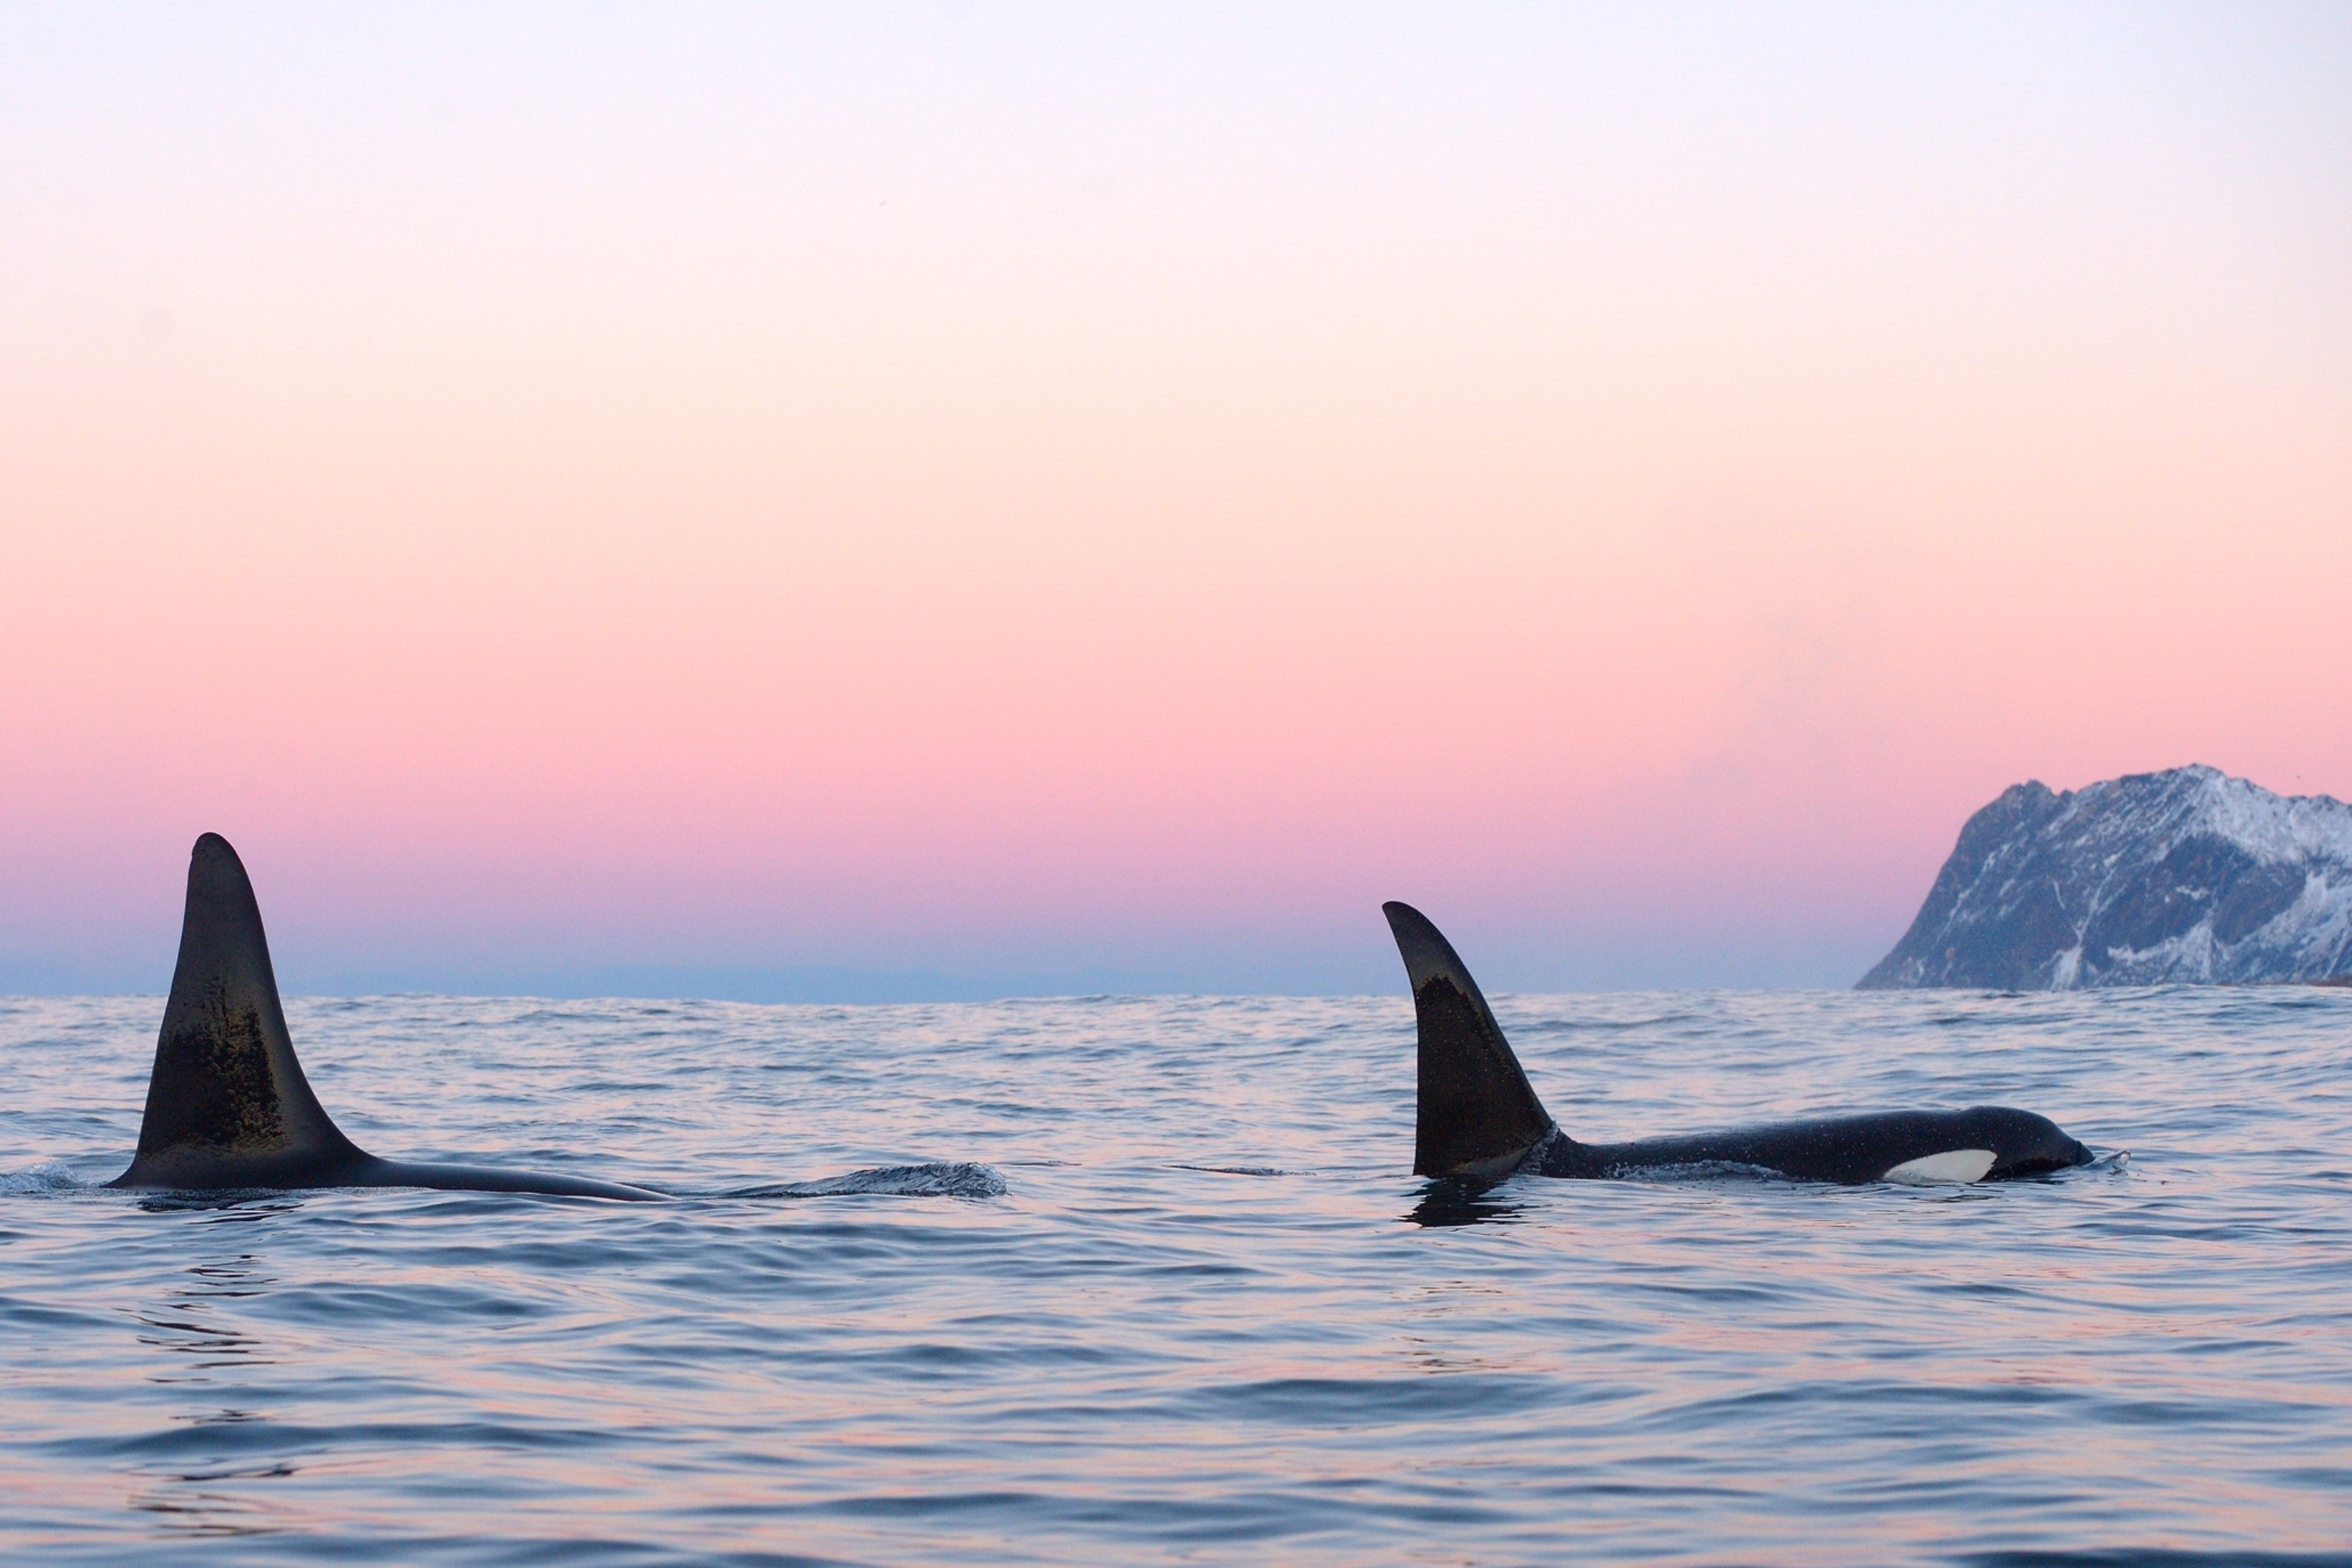 Orcas in Norway. Image credit: Canva. Alt text: two whales and island in the sea.